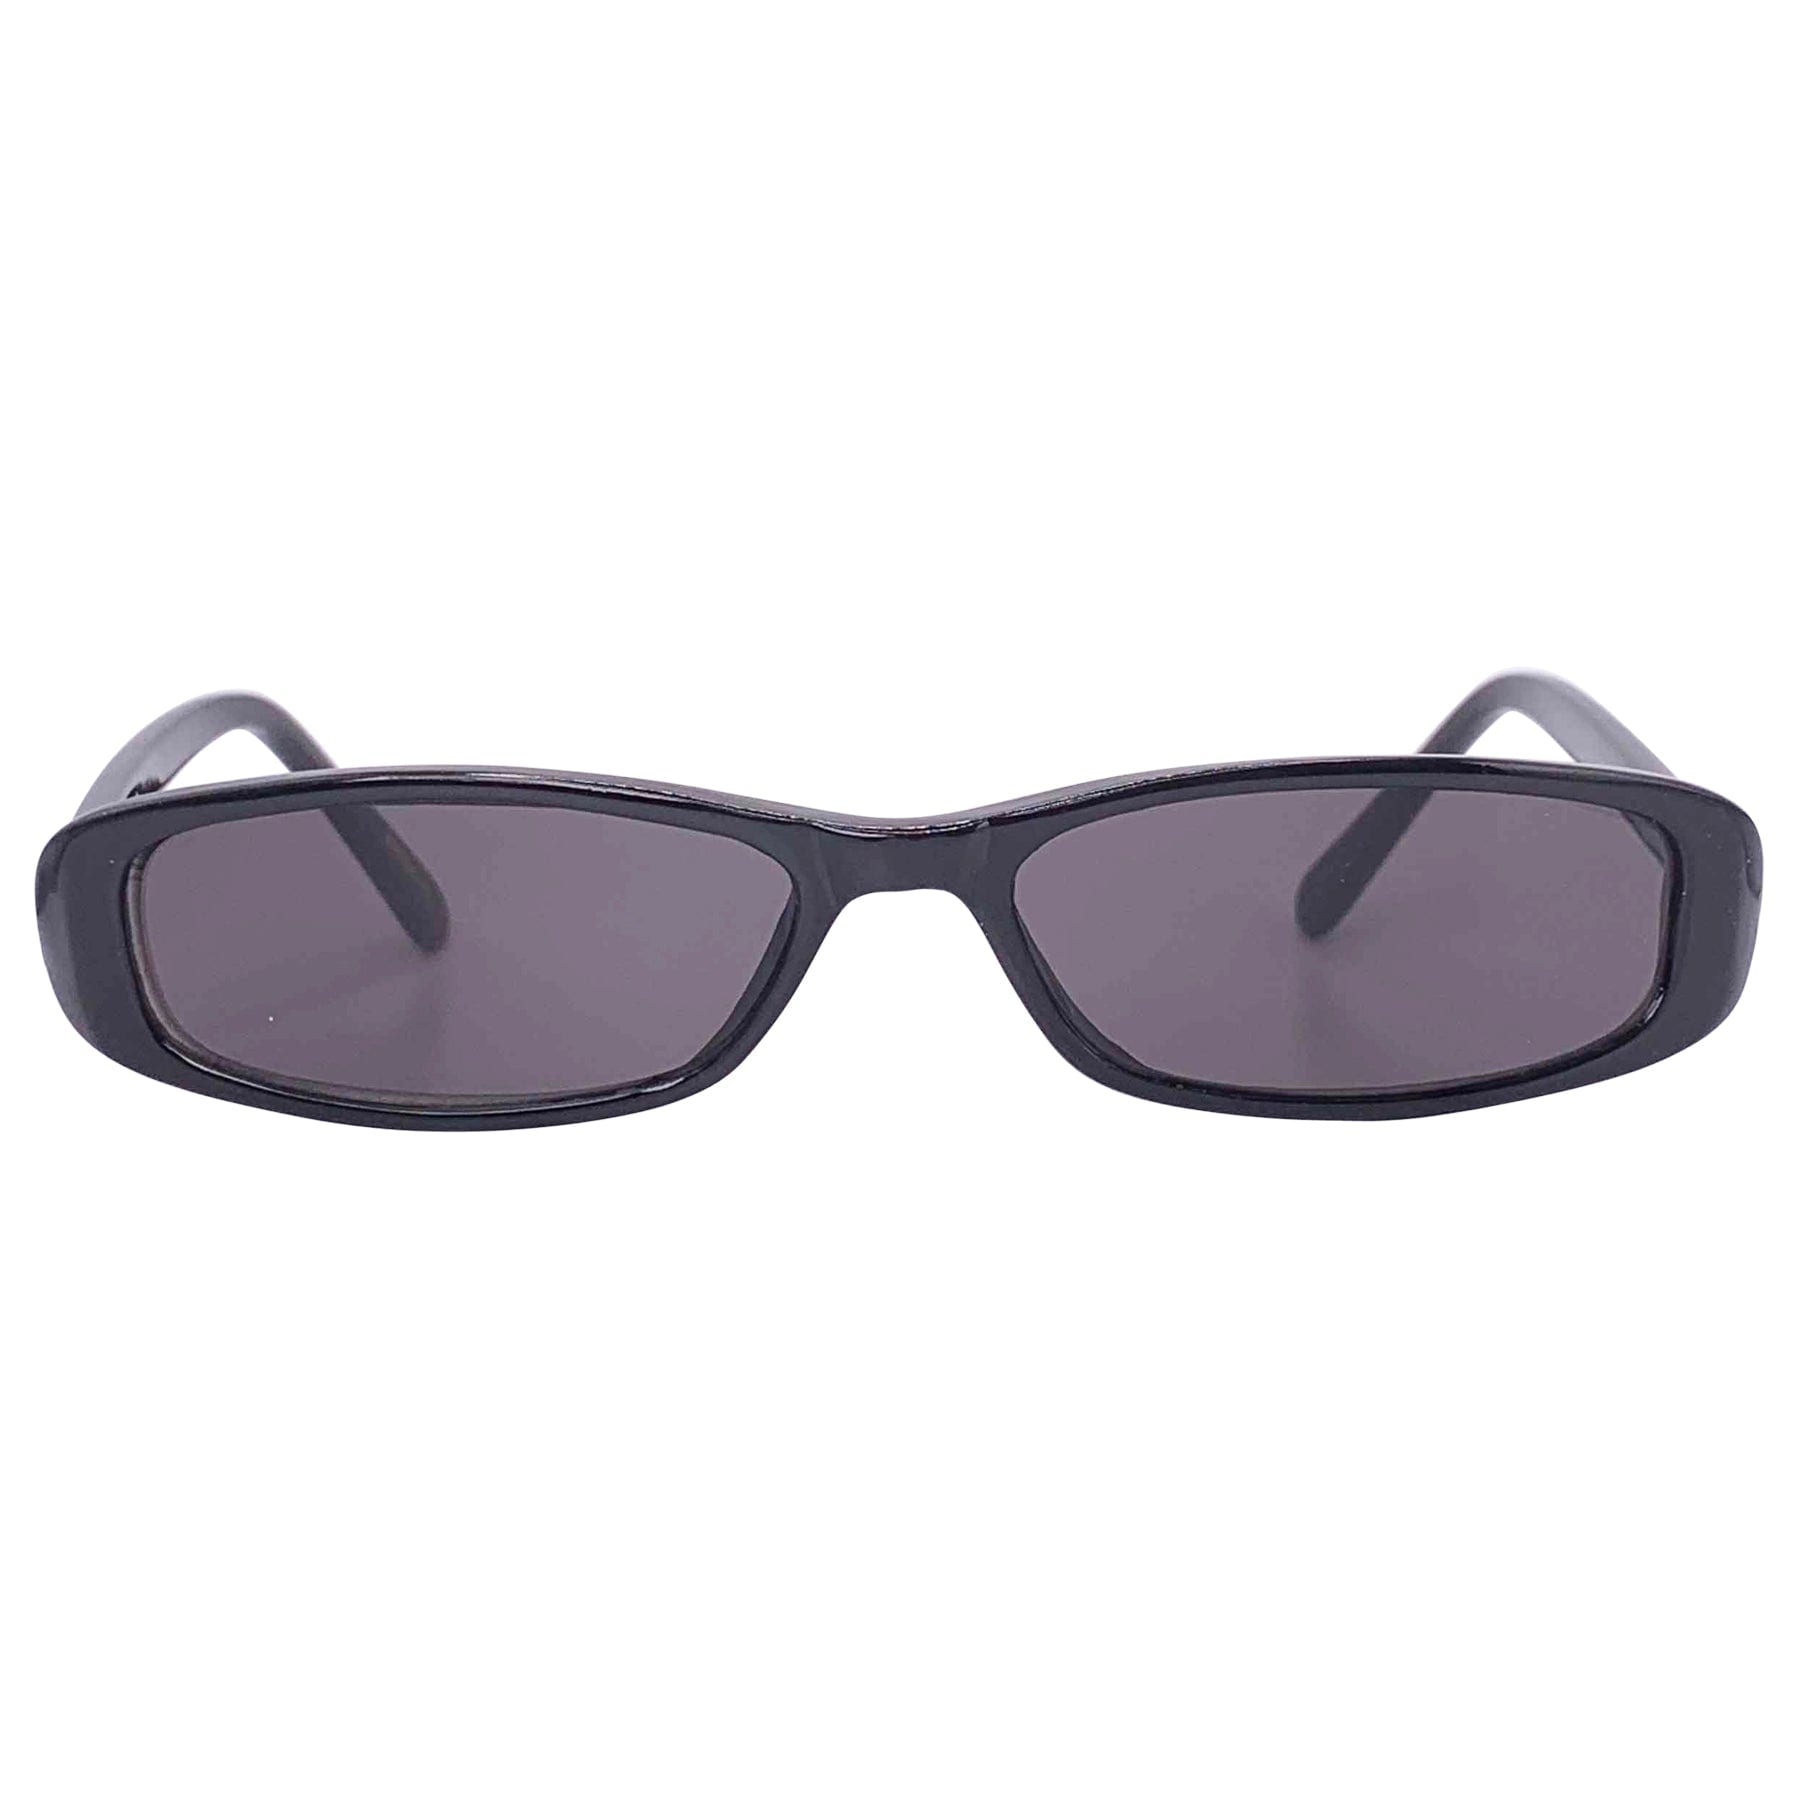 unique sunglasses with a rectangular small 90s style frame